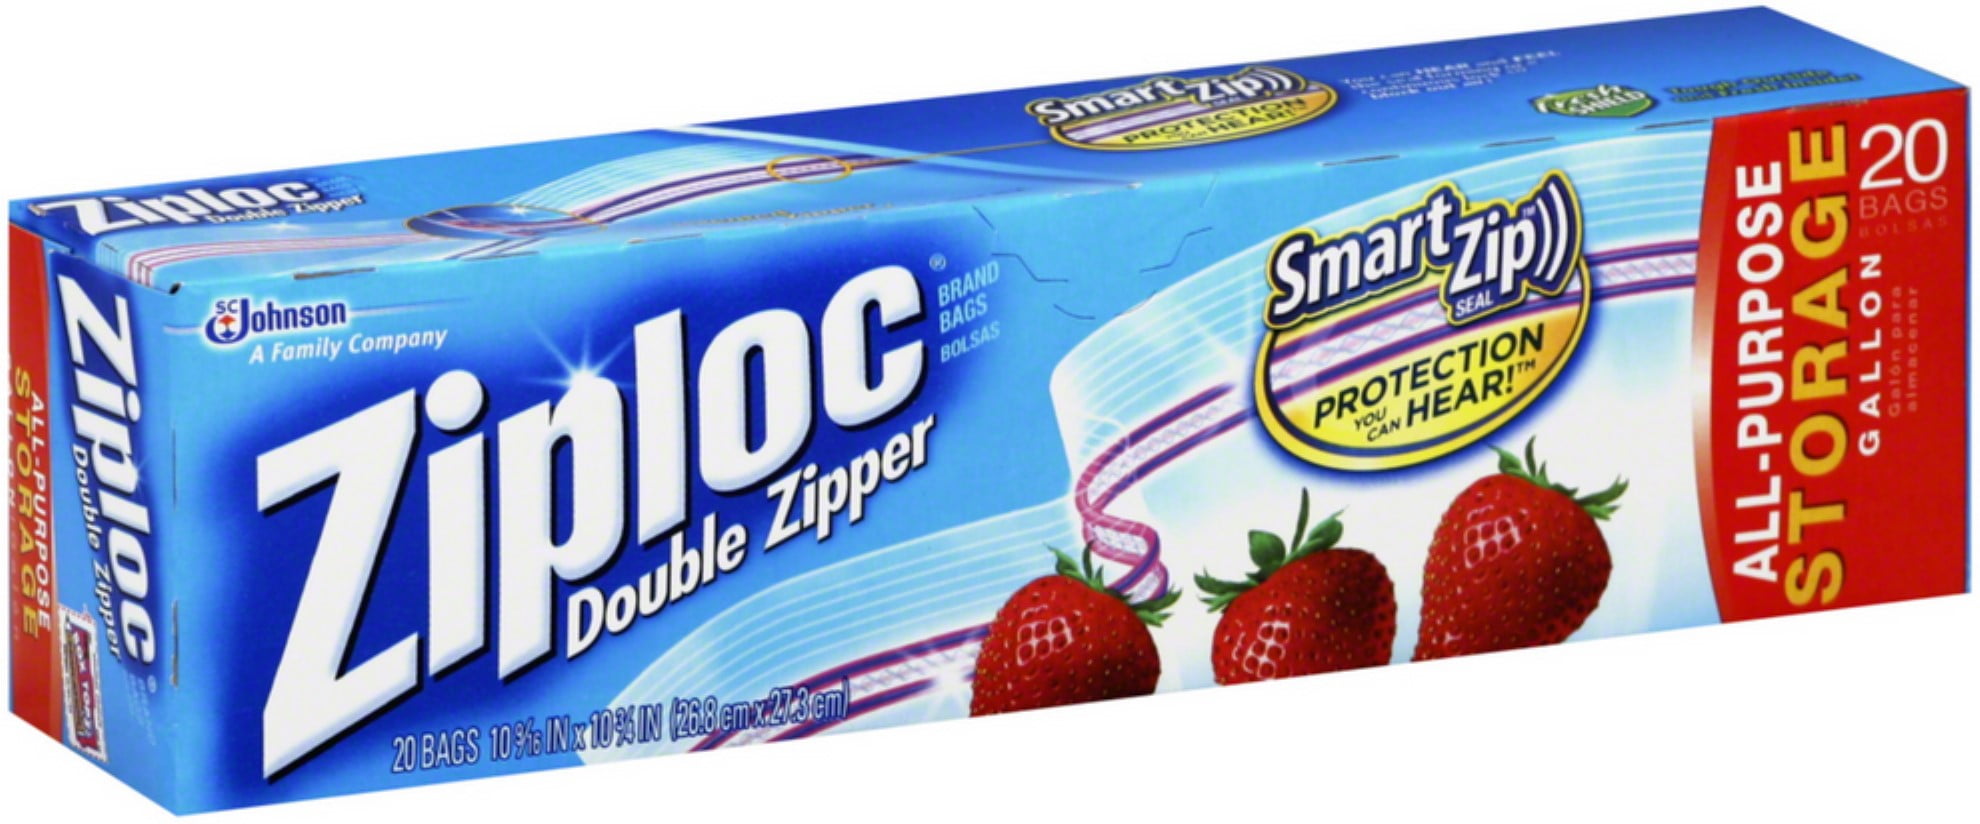 Ziploc Storage Bags, Gallon Size, Pack of 19